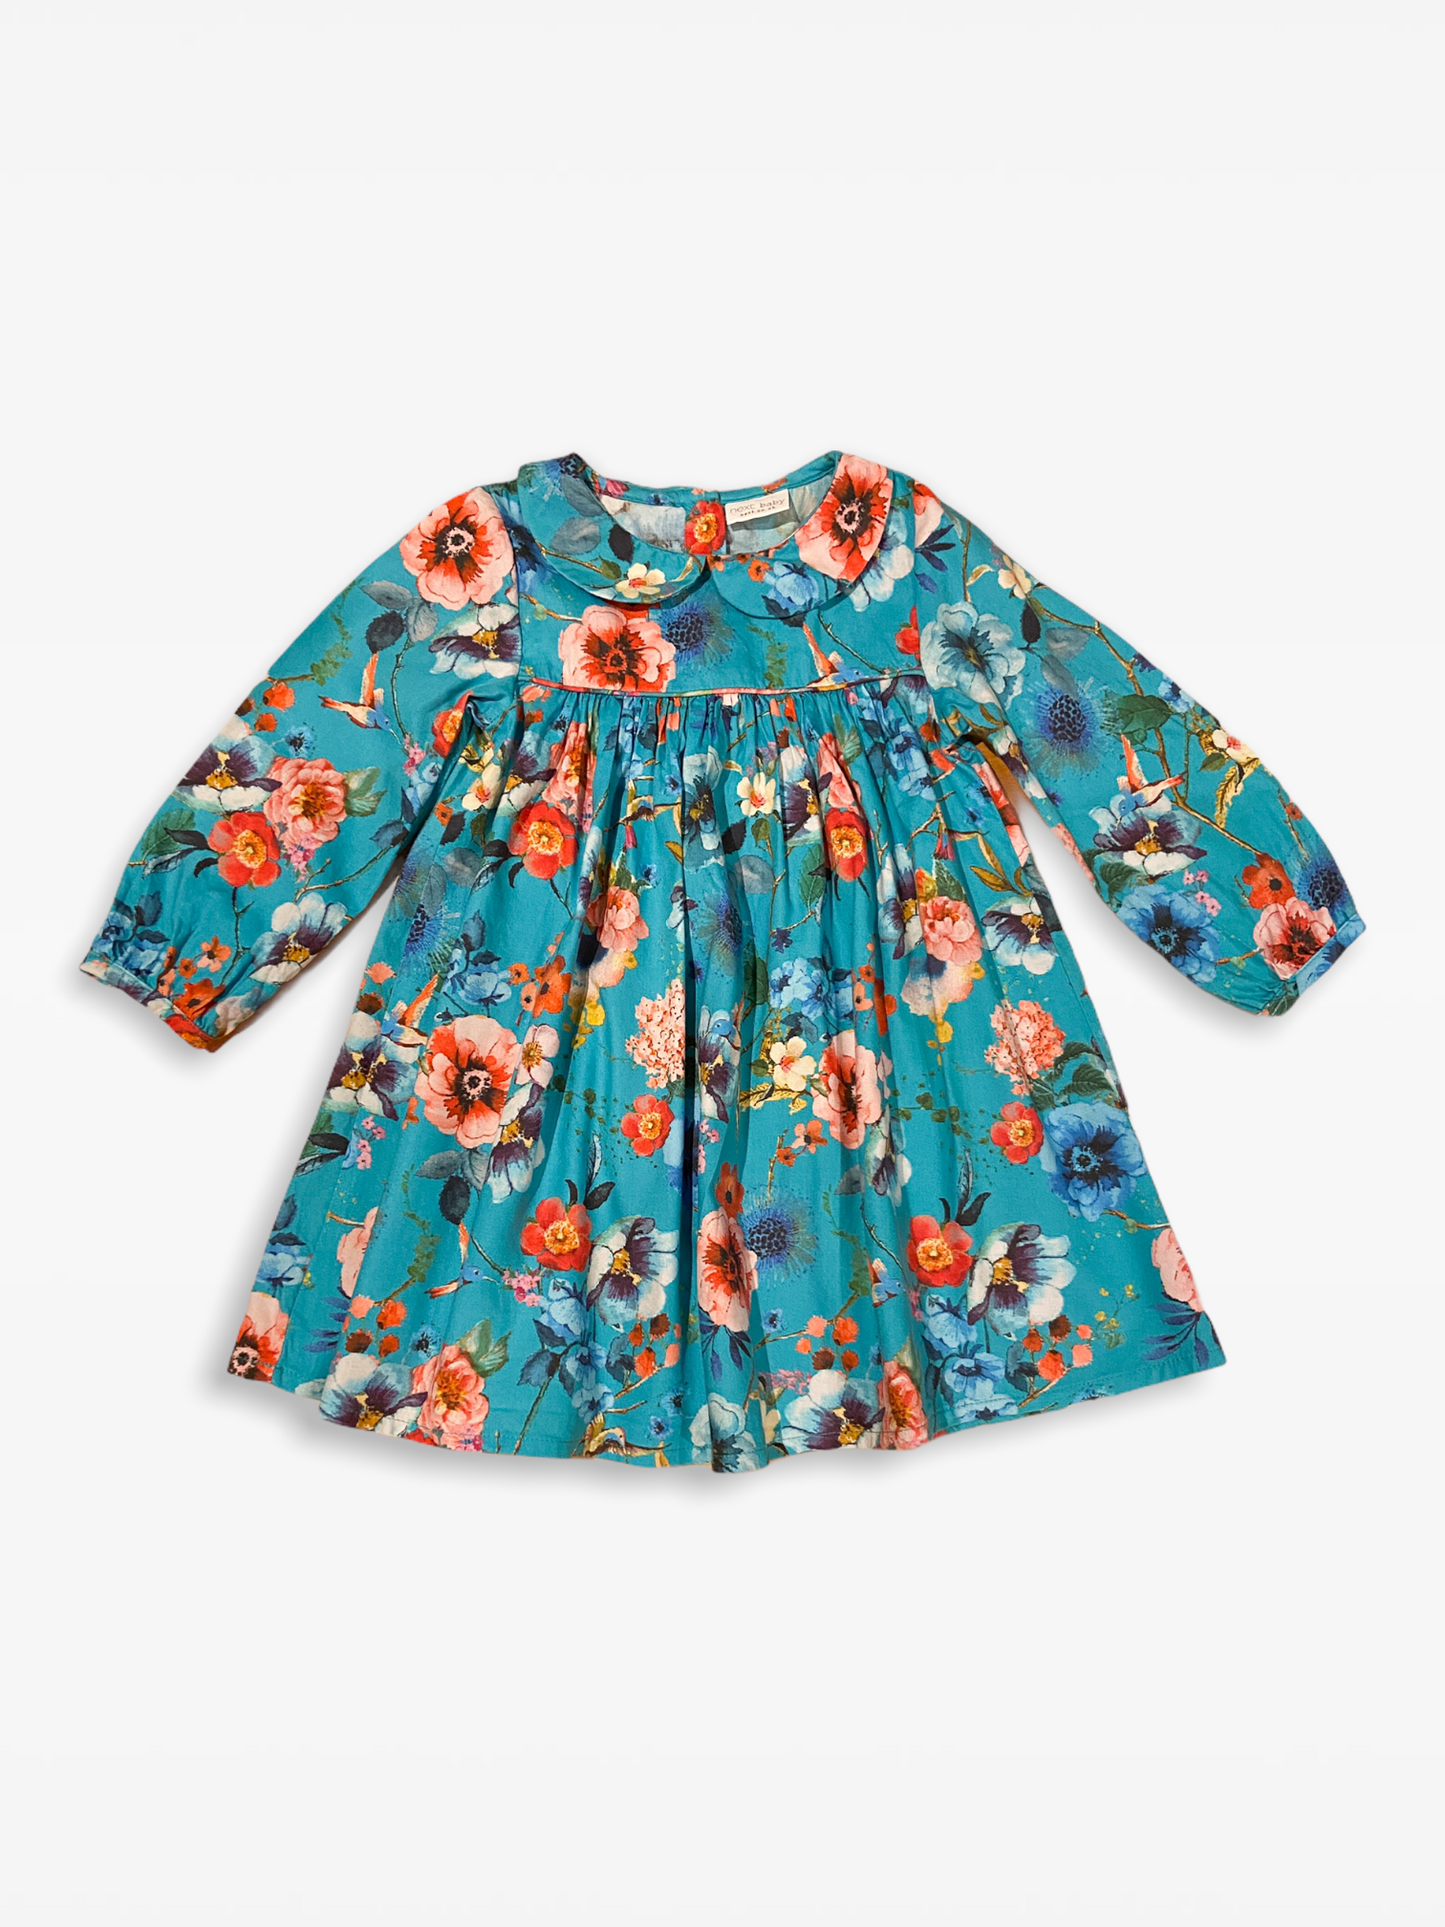 12-18 M Turquoise floral dress